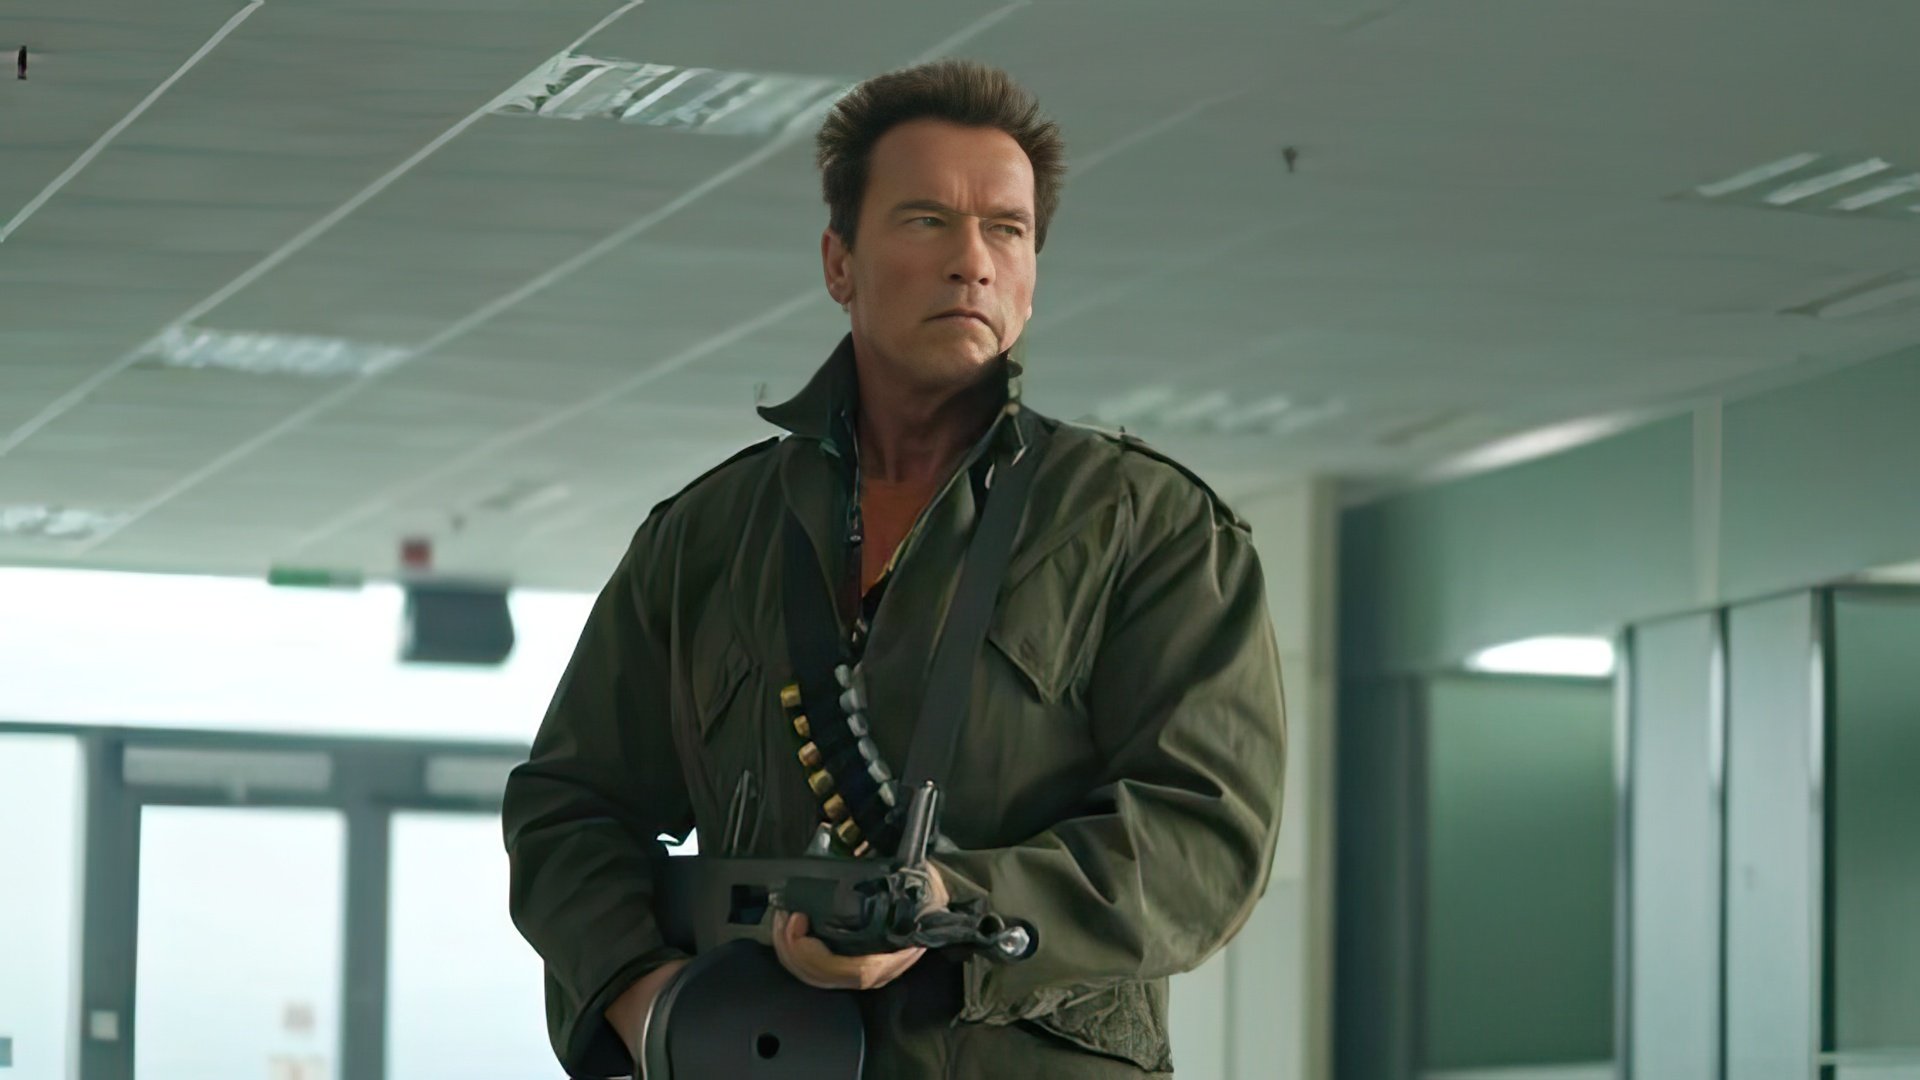 'The Expendables': Schwarzenegger returned to cinema after a break